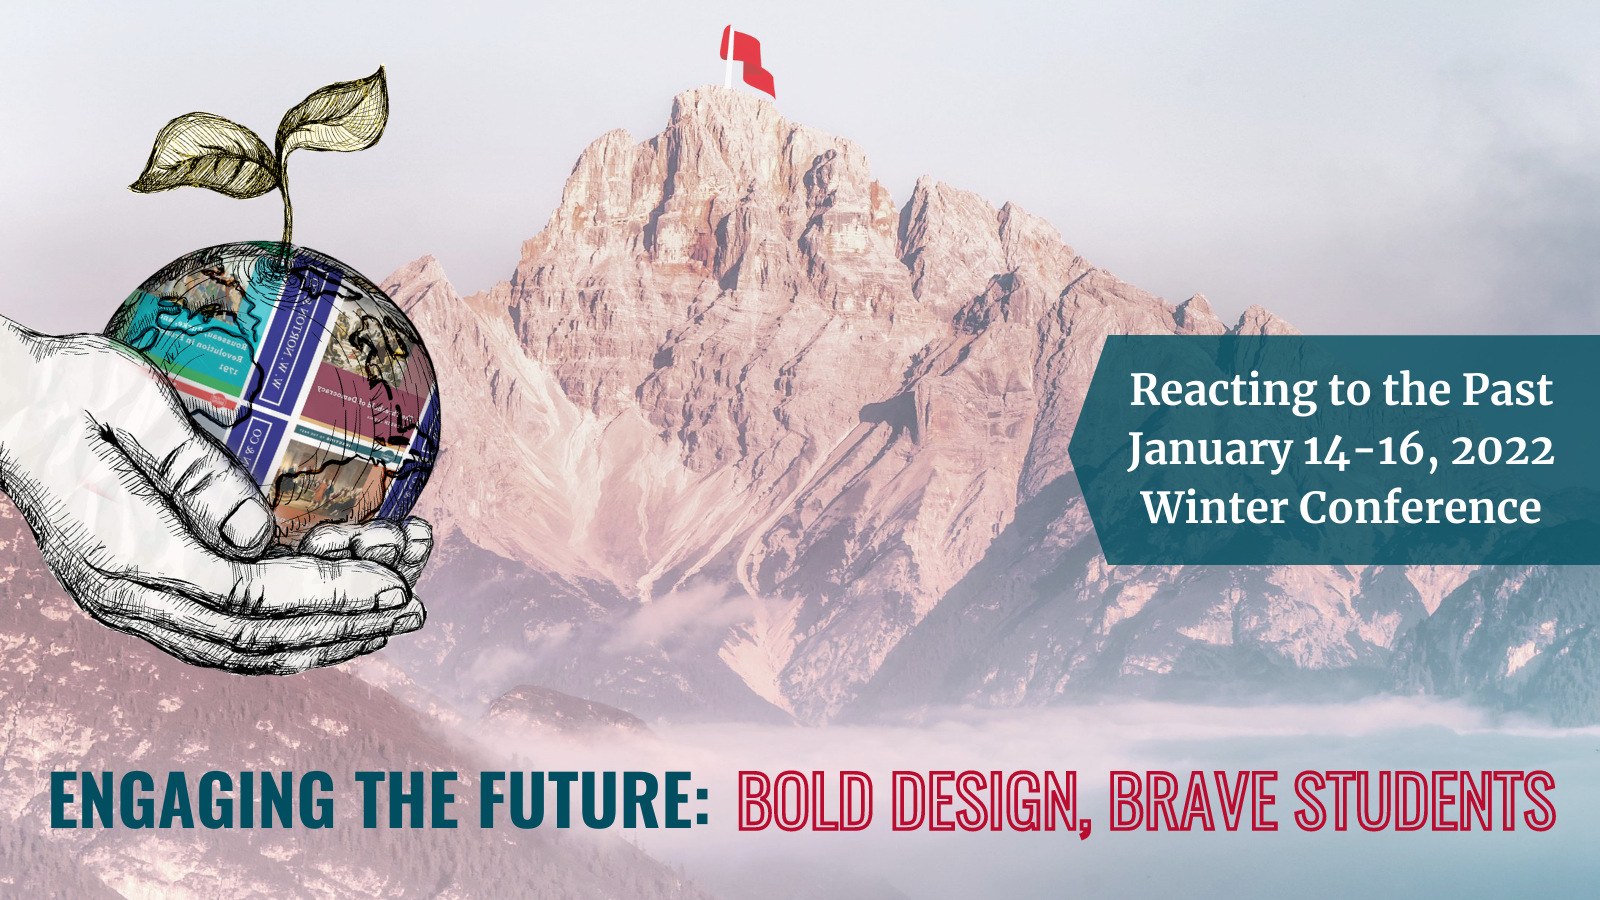 Winter Conference 2022 Engaging the Future - Bold Design, Brave Students